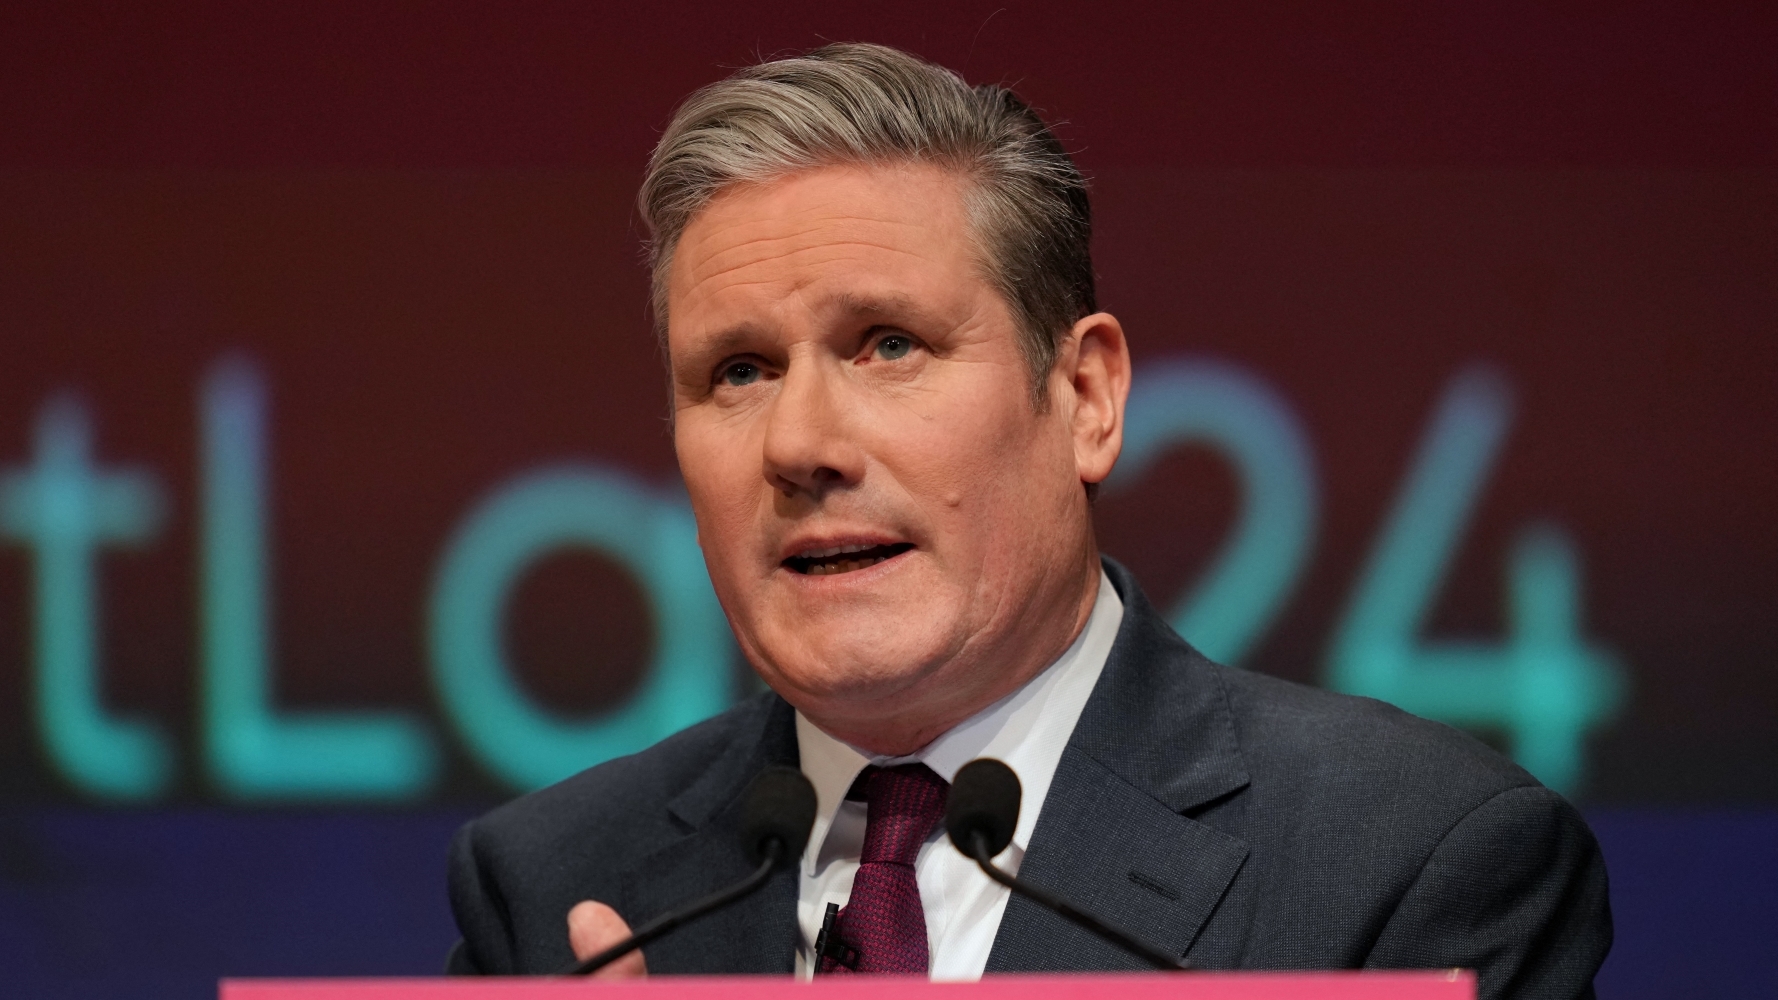 Labour leader Keir Starmer speaks to party members in Glasgow on 18 February (AFP/Andy Buchanan)